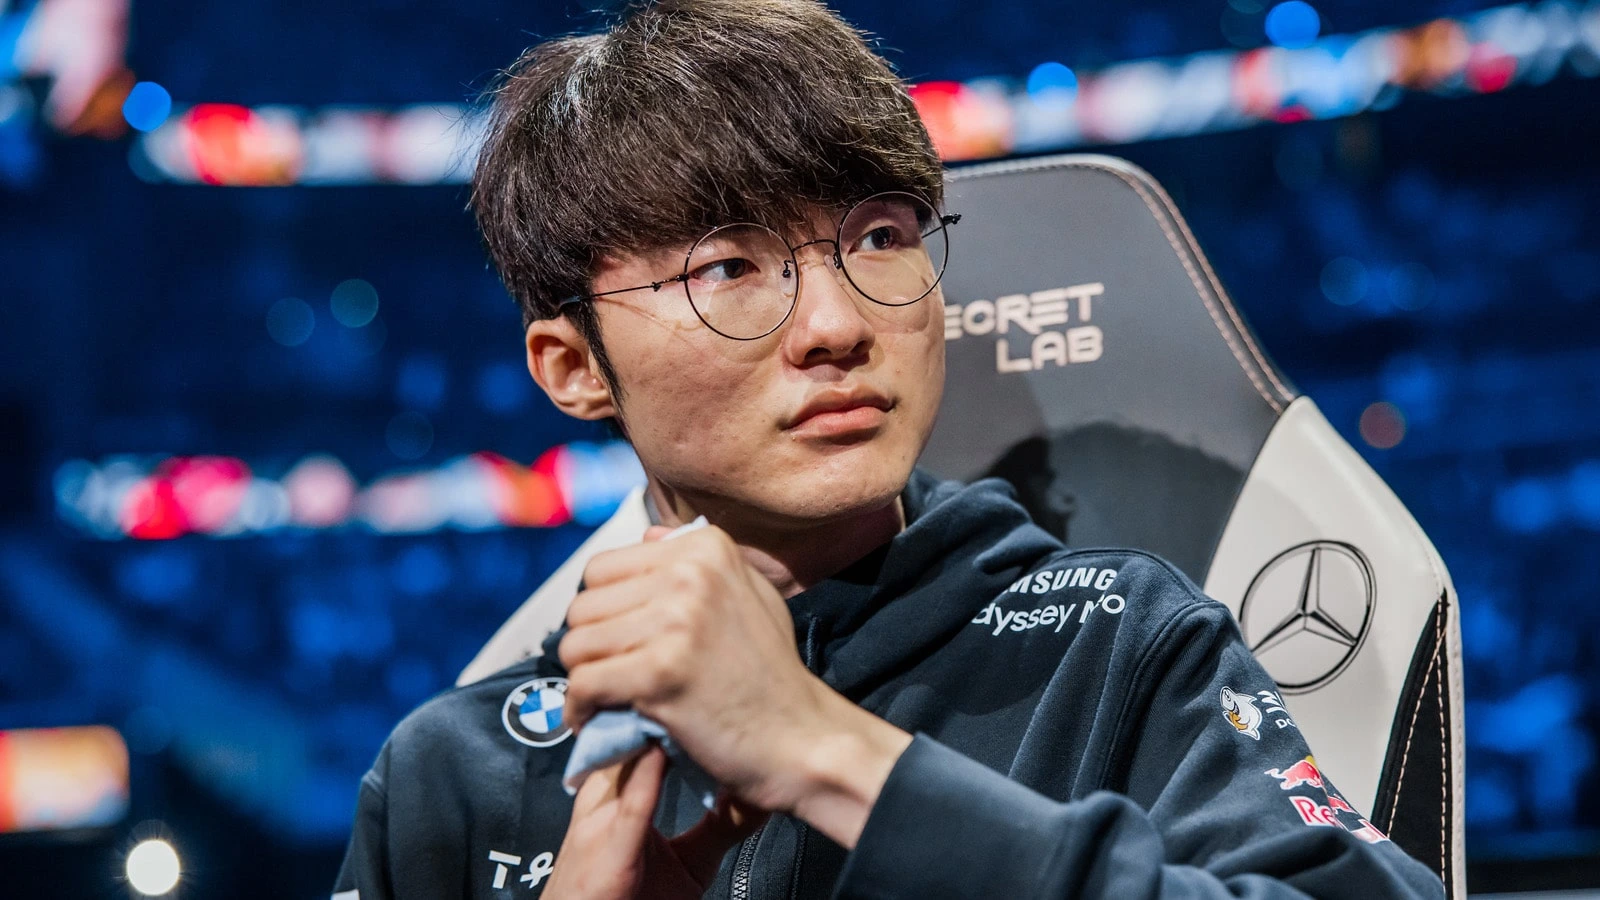 Even while injured, Faker is still helping T1 qualify for the LCK playoffs